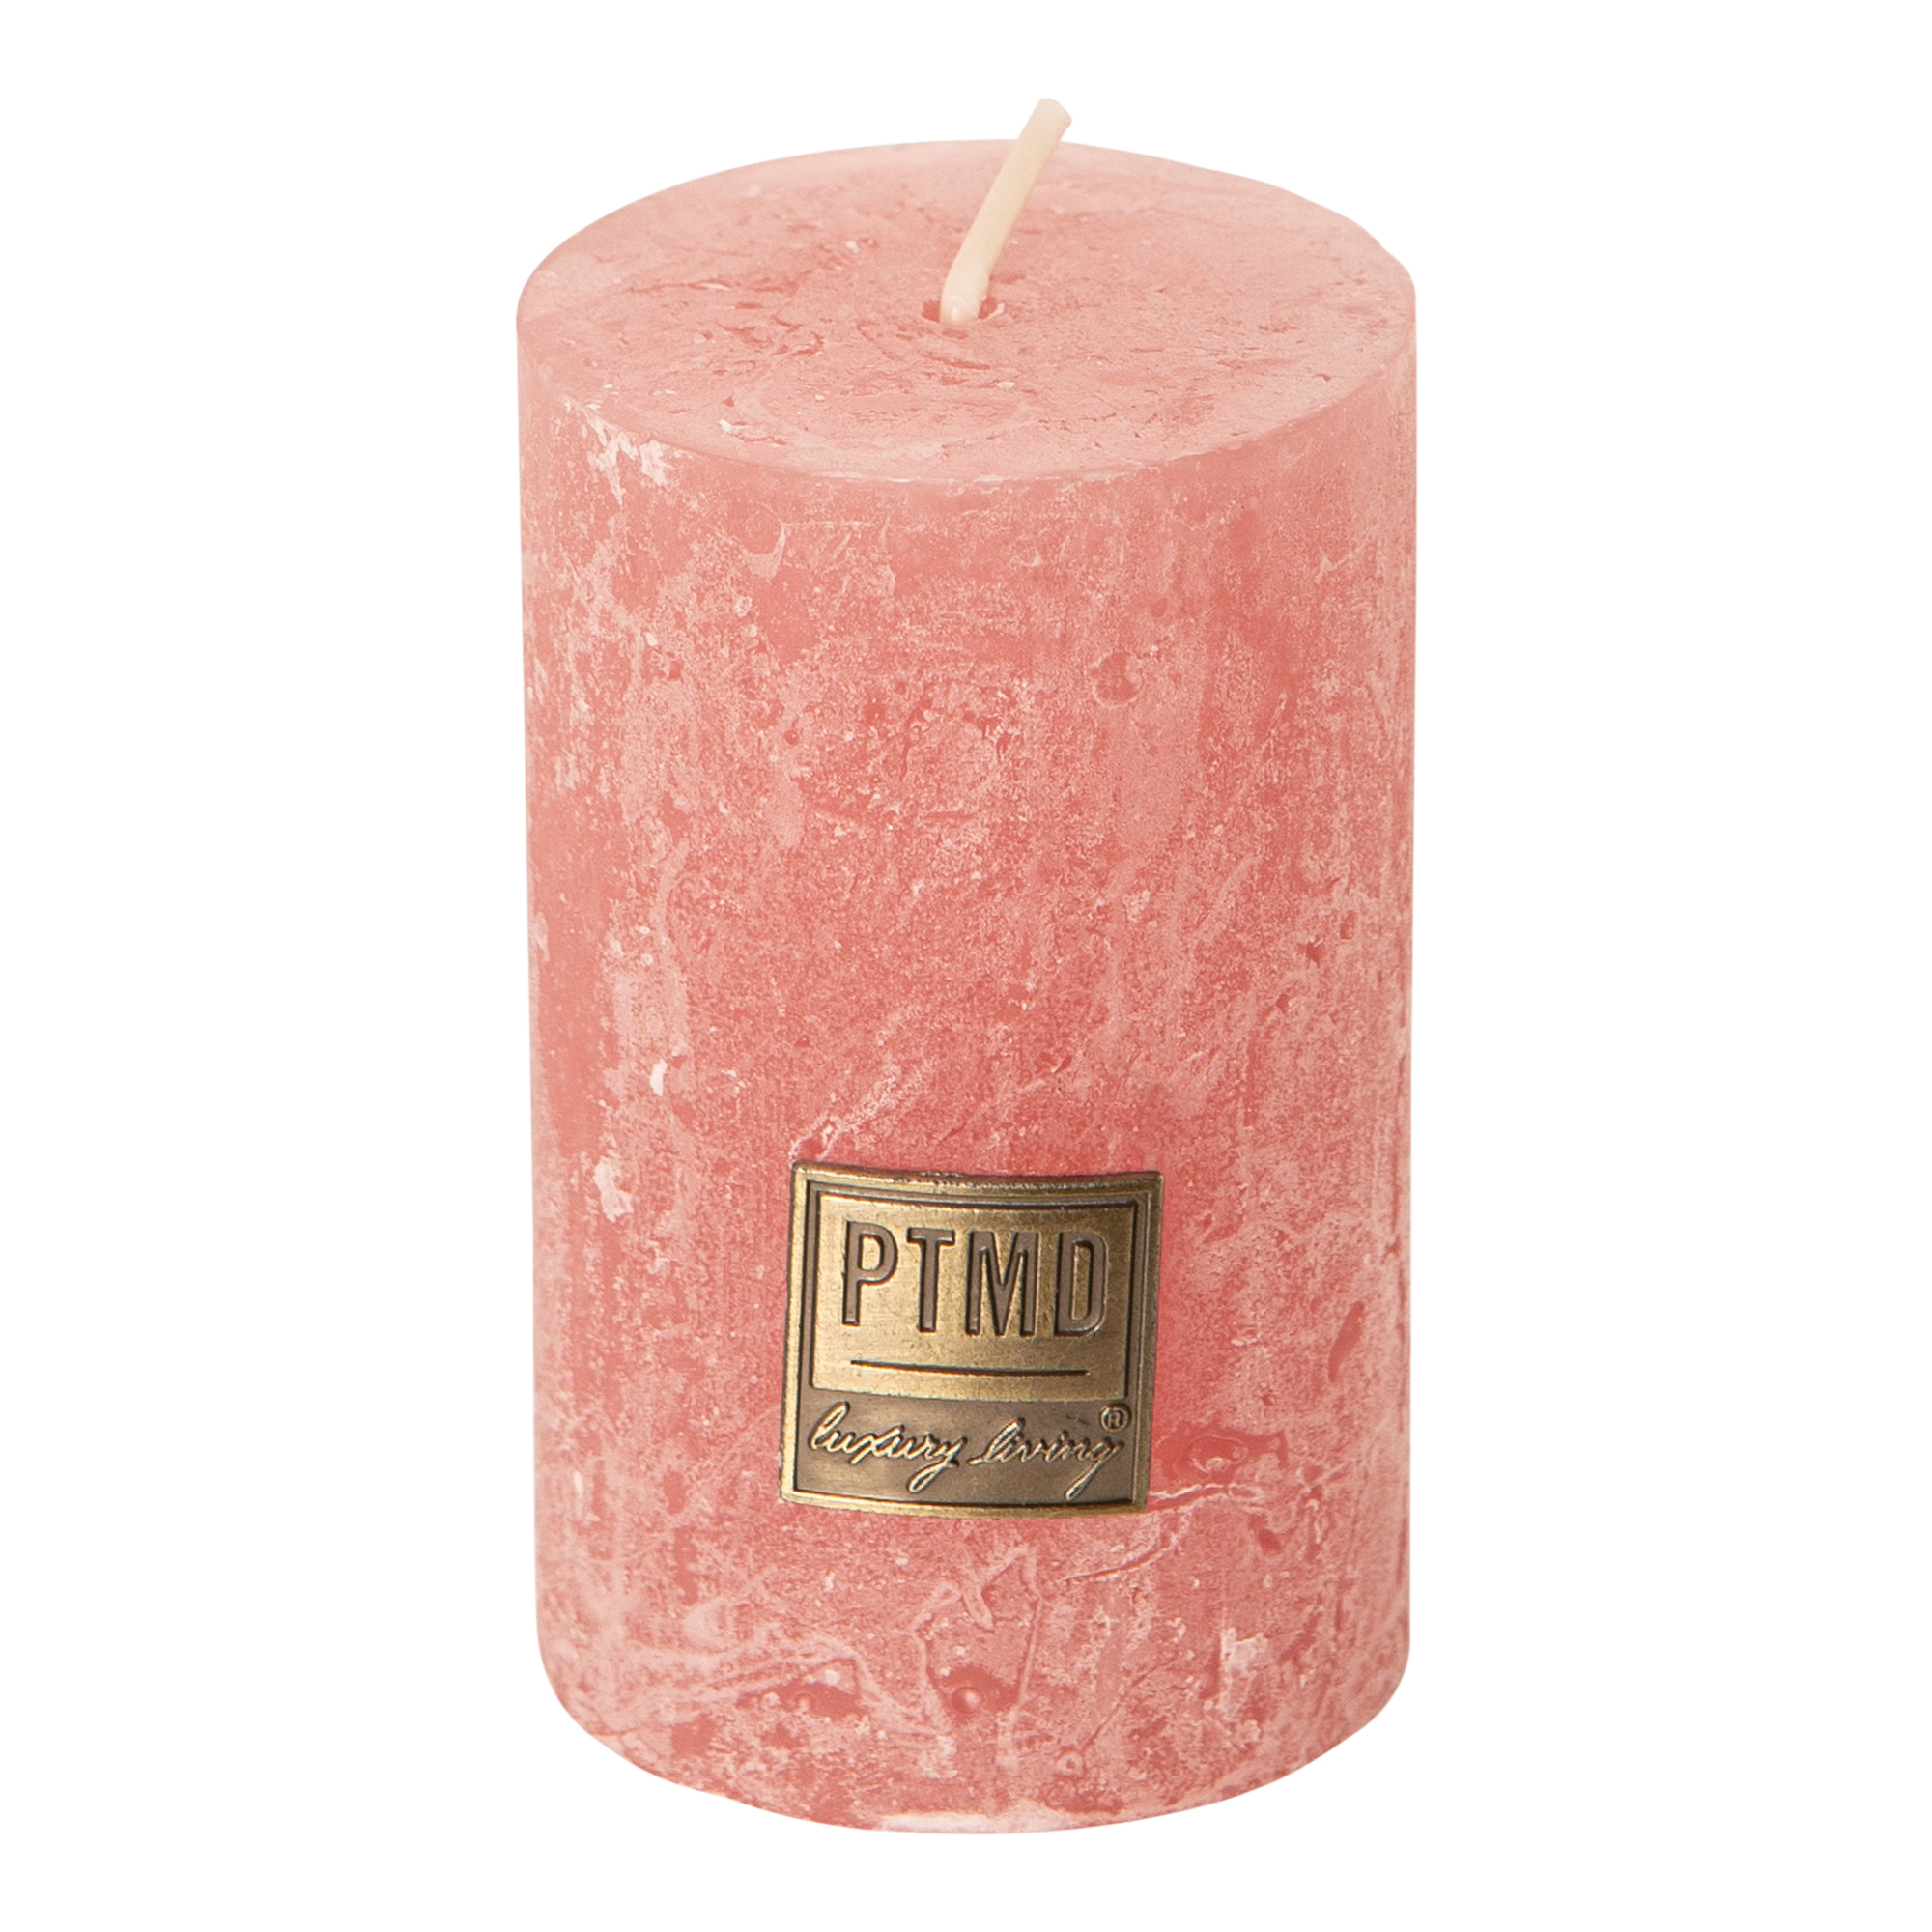 PTMD 8 x 5cm Blush Pink Rustic Pillar Candle